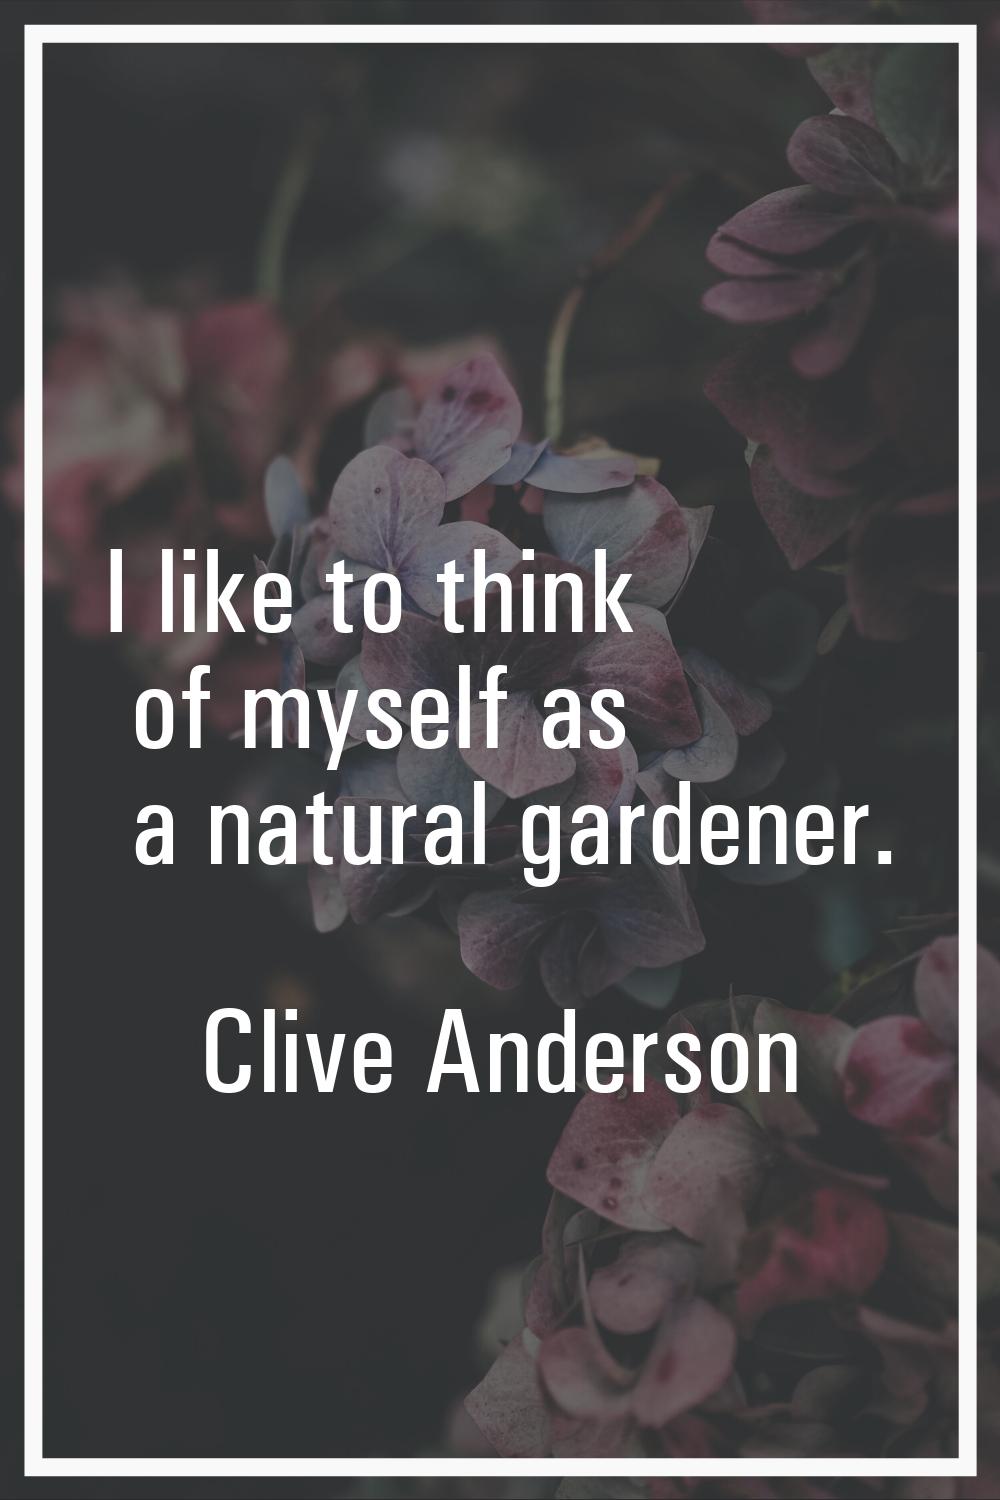 I like to think of myself as a natural gardener.